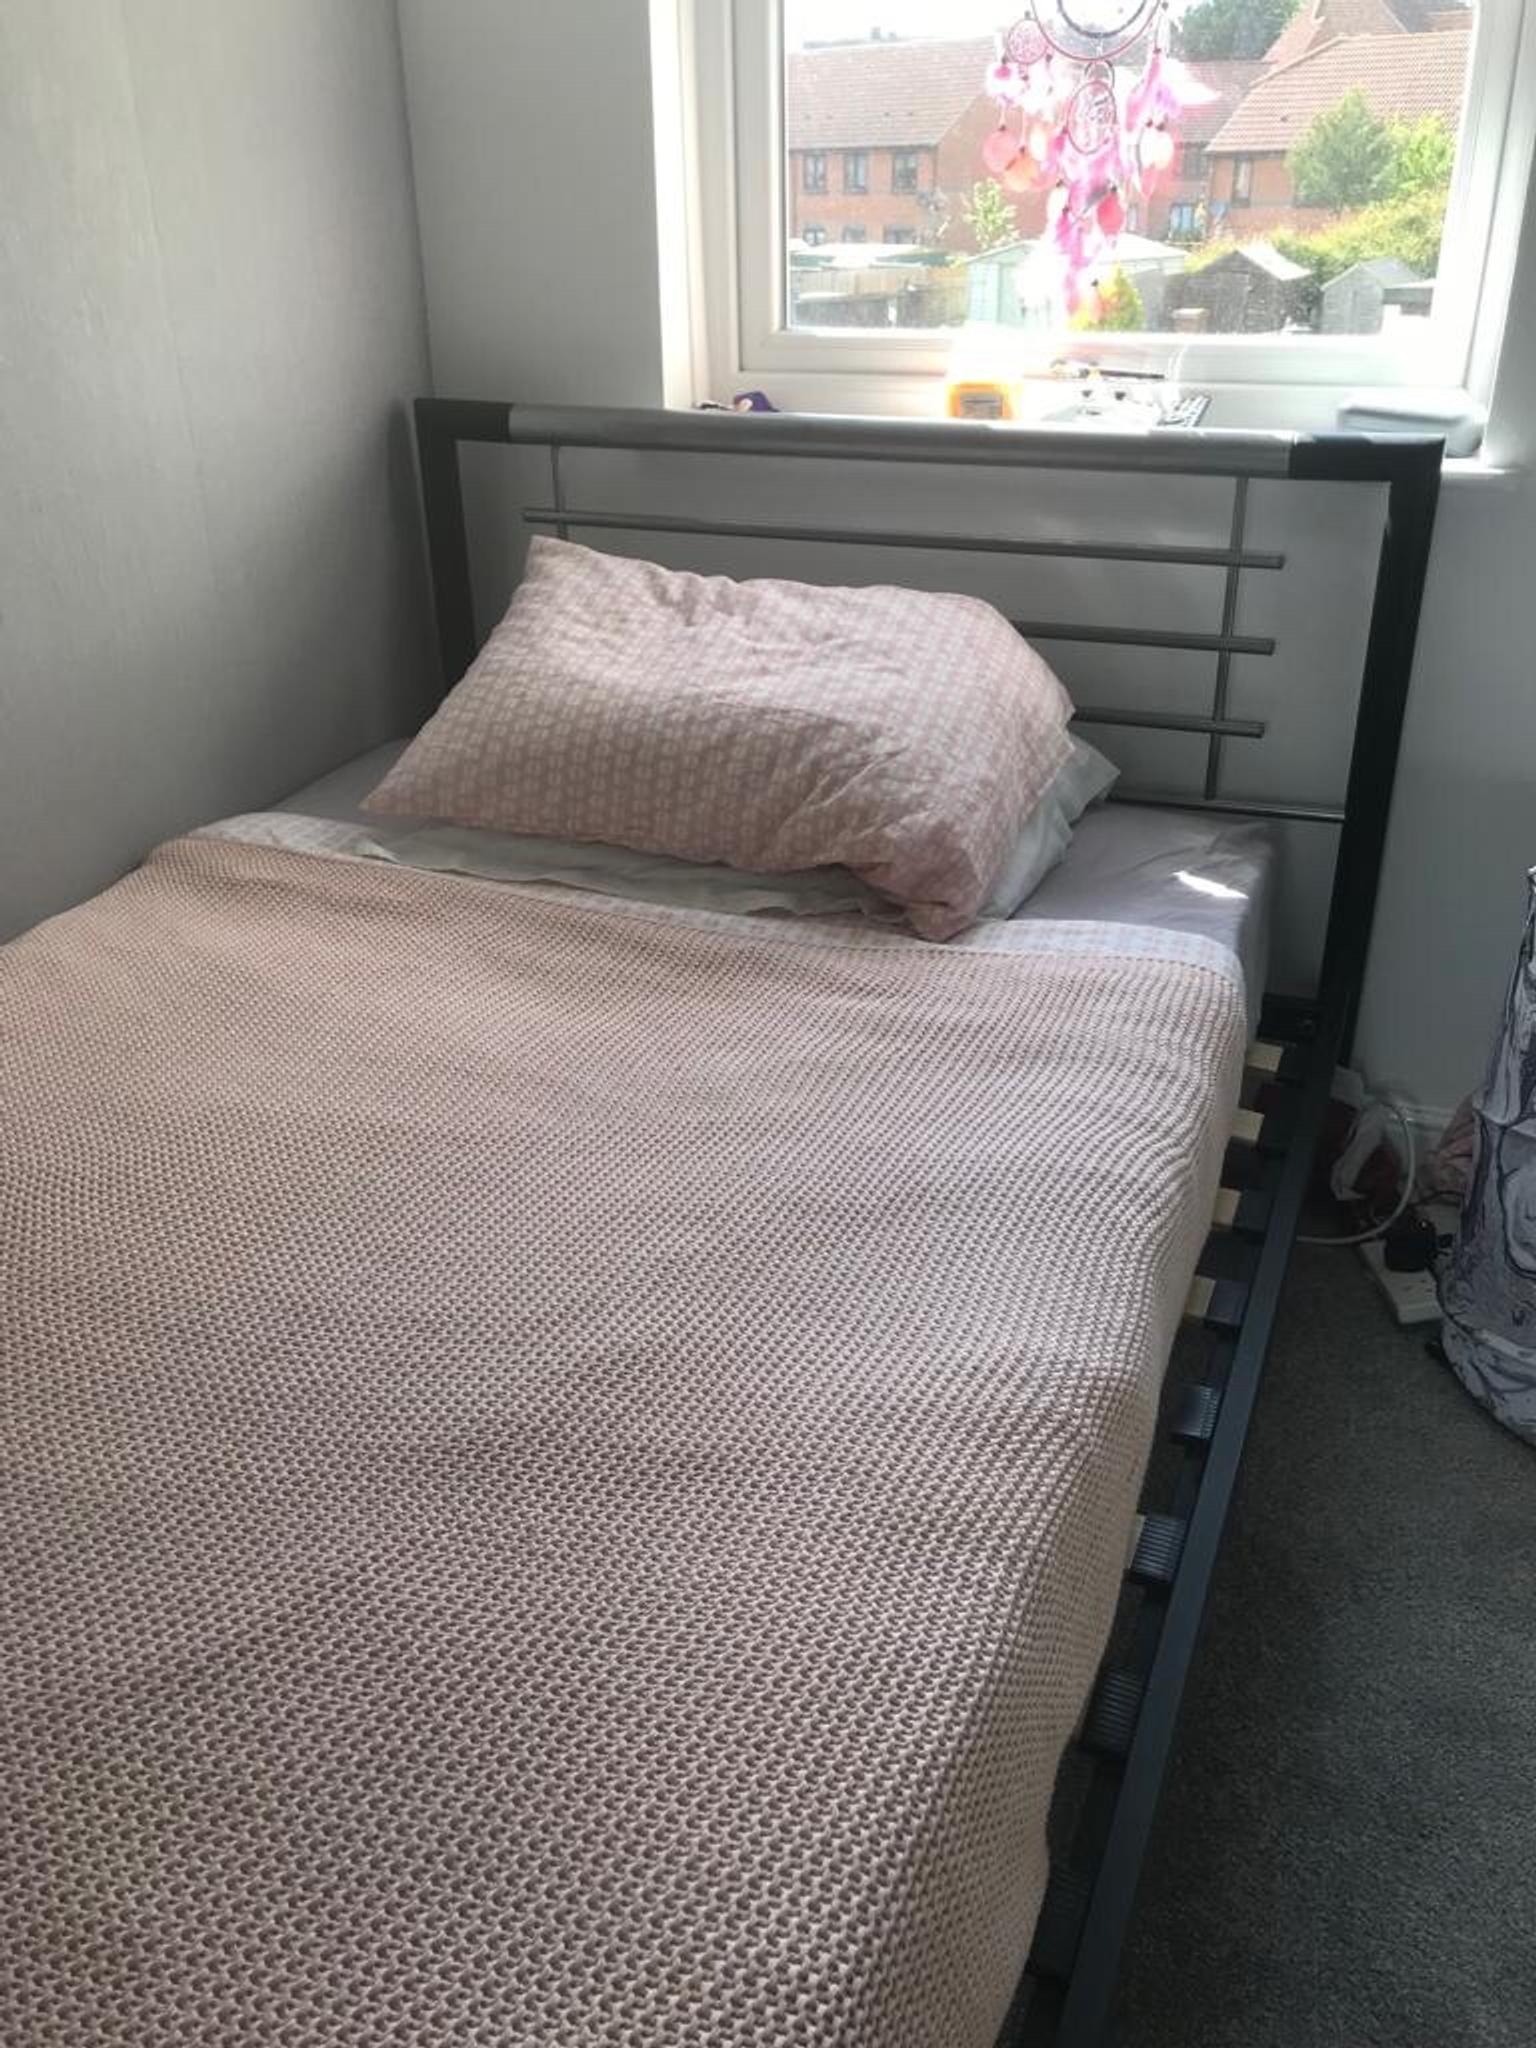 Small Double Bed Frame Sold In Hoo St Werburgh For 40 00 For Sale